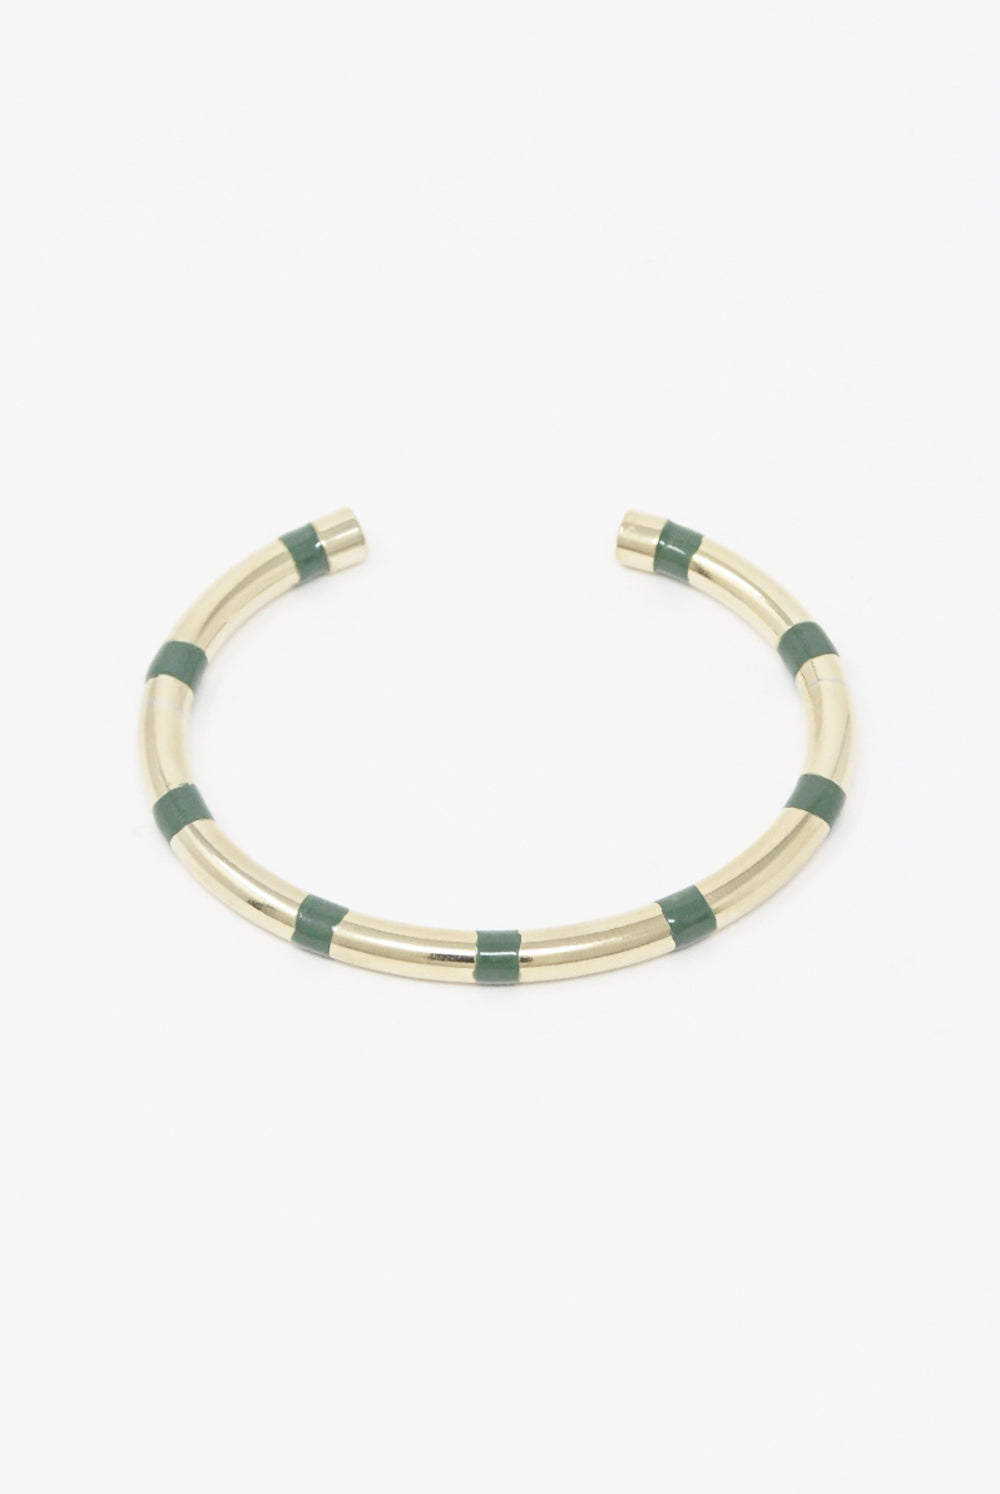 Abby Carnevale - 14K Gold Plated Brass Striped Cuff in Green